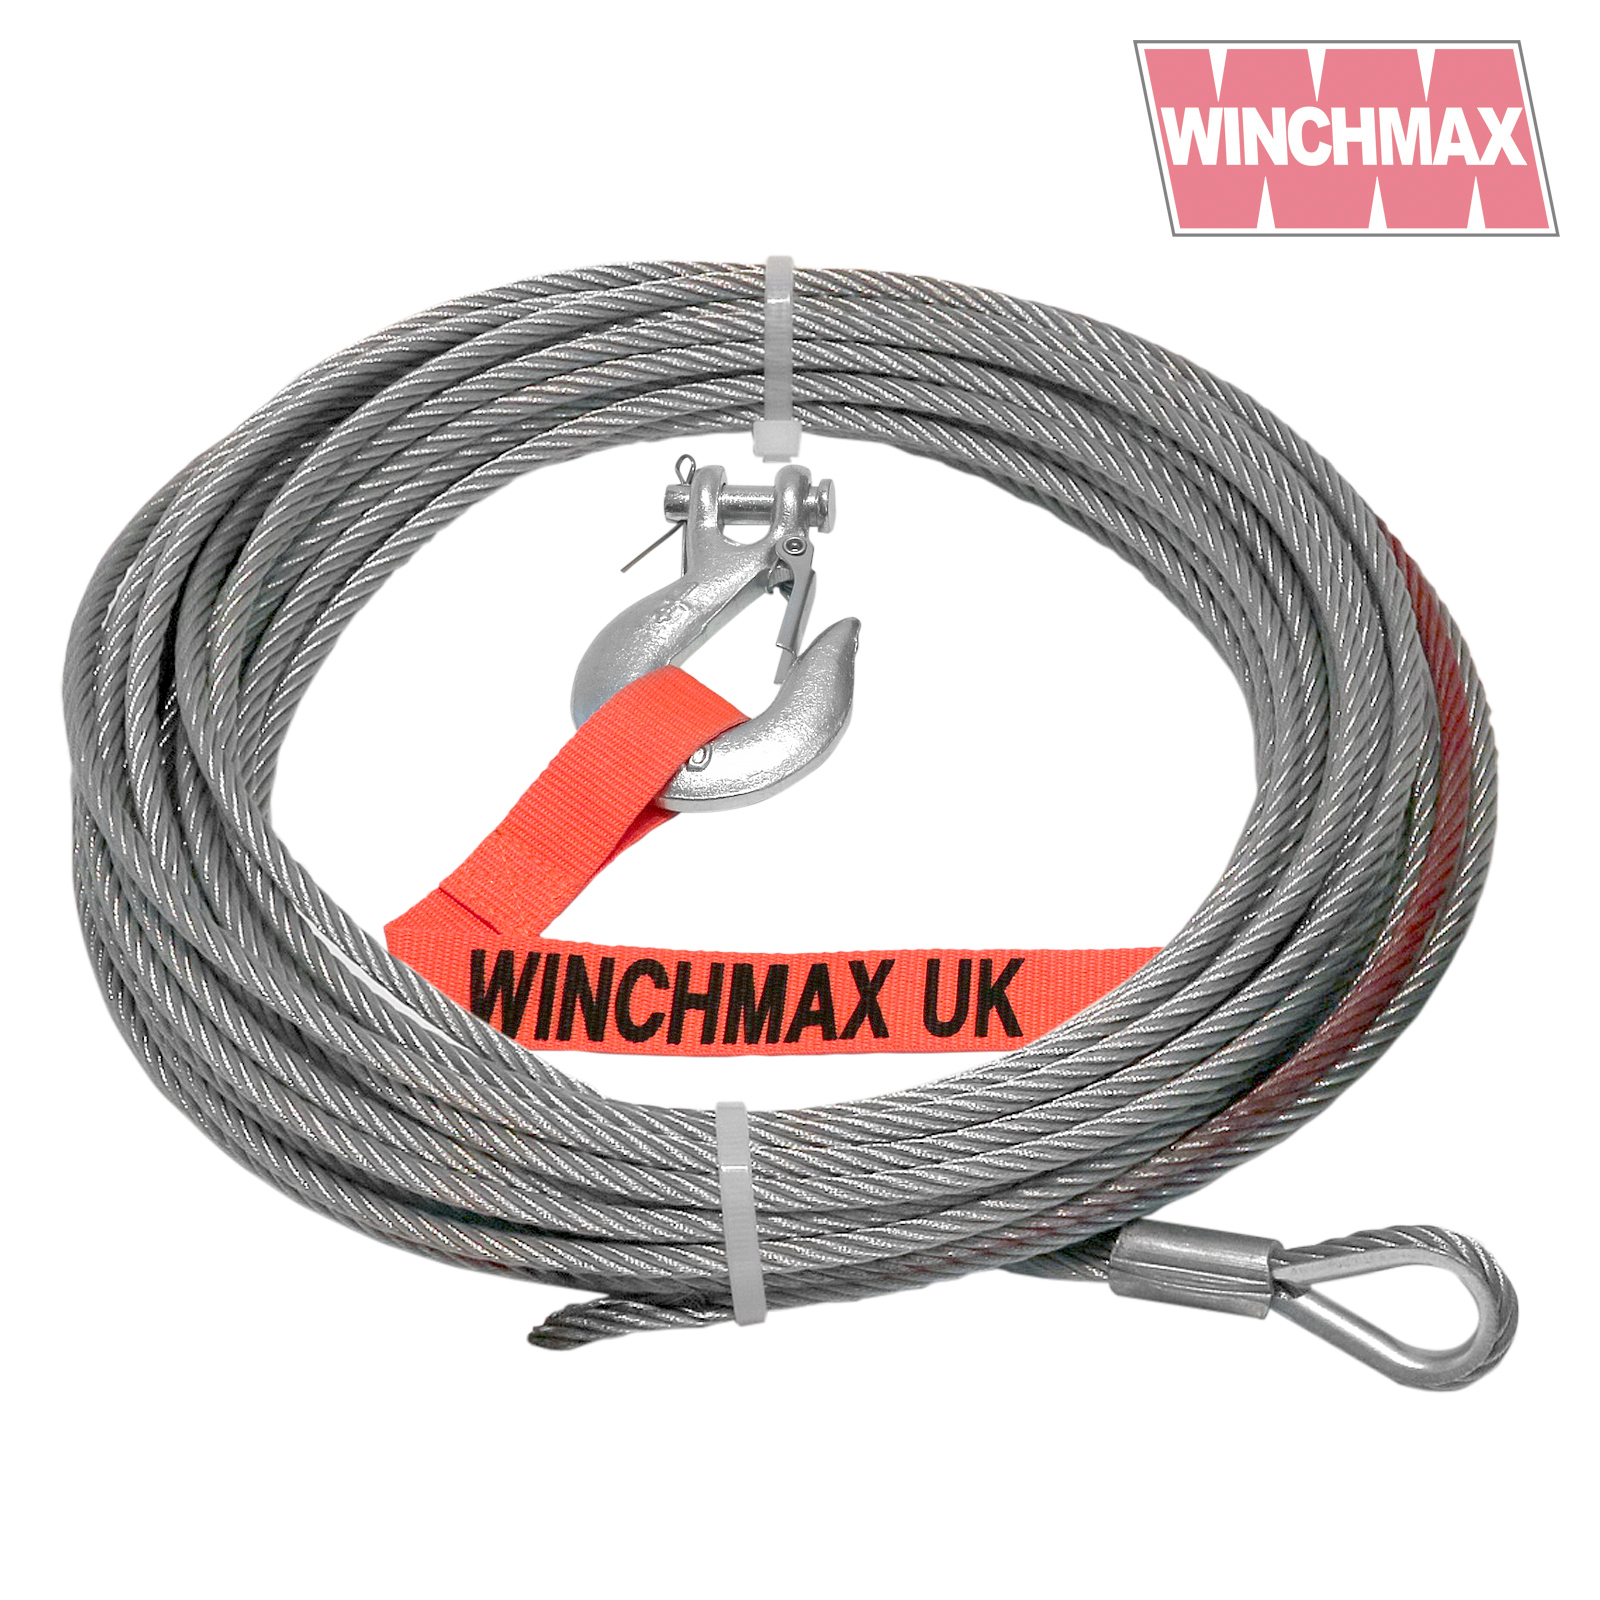 Steel Rope 15m x 5mm, Hole Fix. 1/4 inch Clevis Hook. For winches up to  4,000lb. - Winchmax